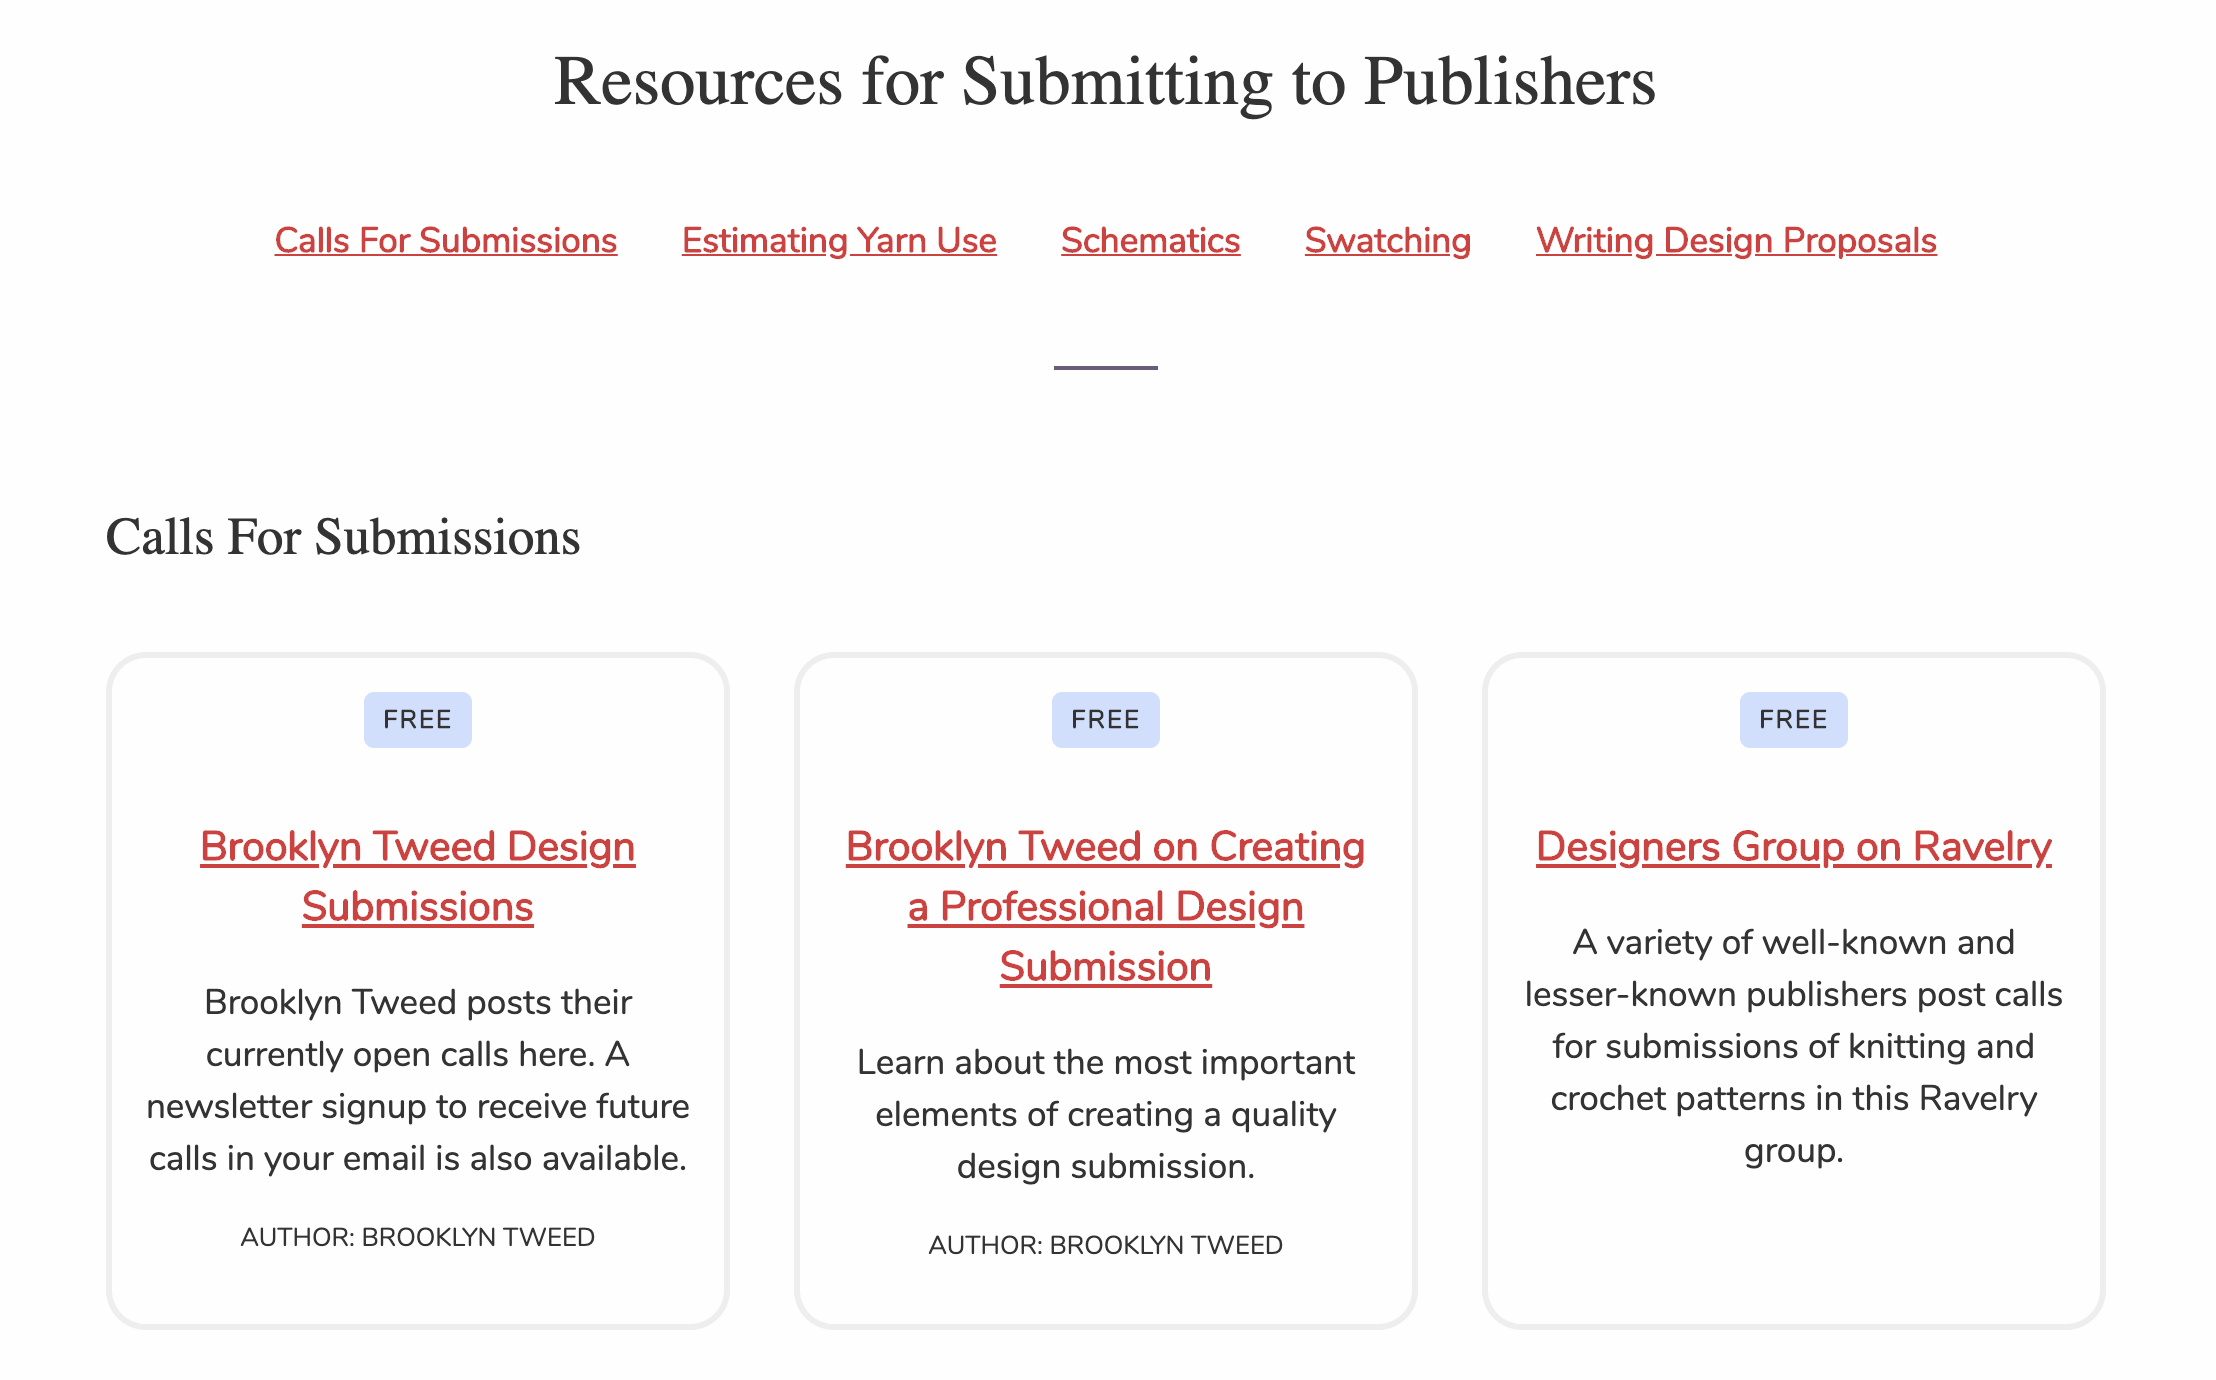 The Submitting to Publishers resources page with the following topics: Calls For Submissions, Estimating Yarn Use, Schematics, Swatching, Writing Design Proposals. There is a grid of resource cards below the topics list.